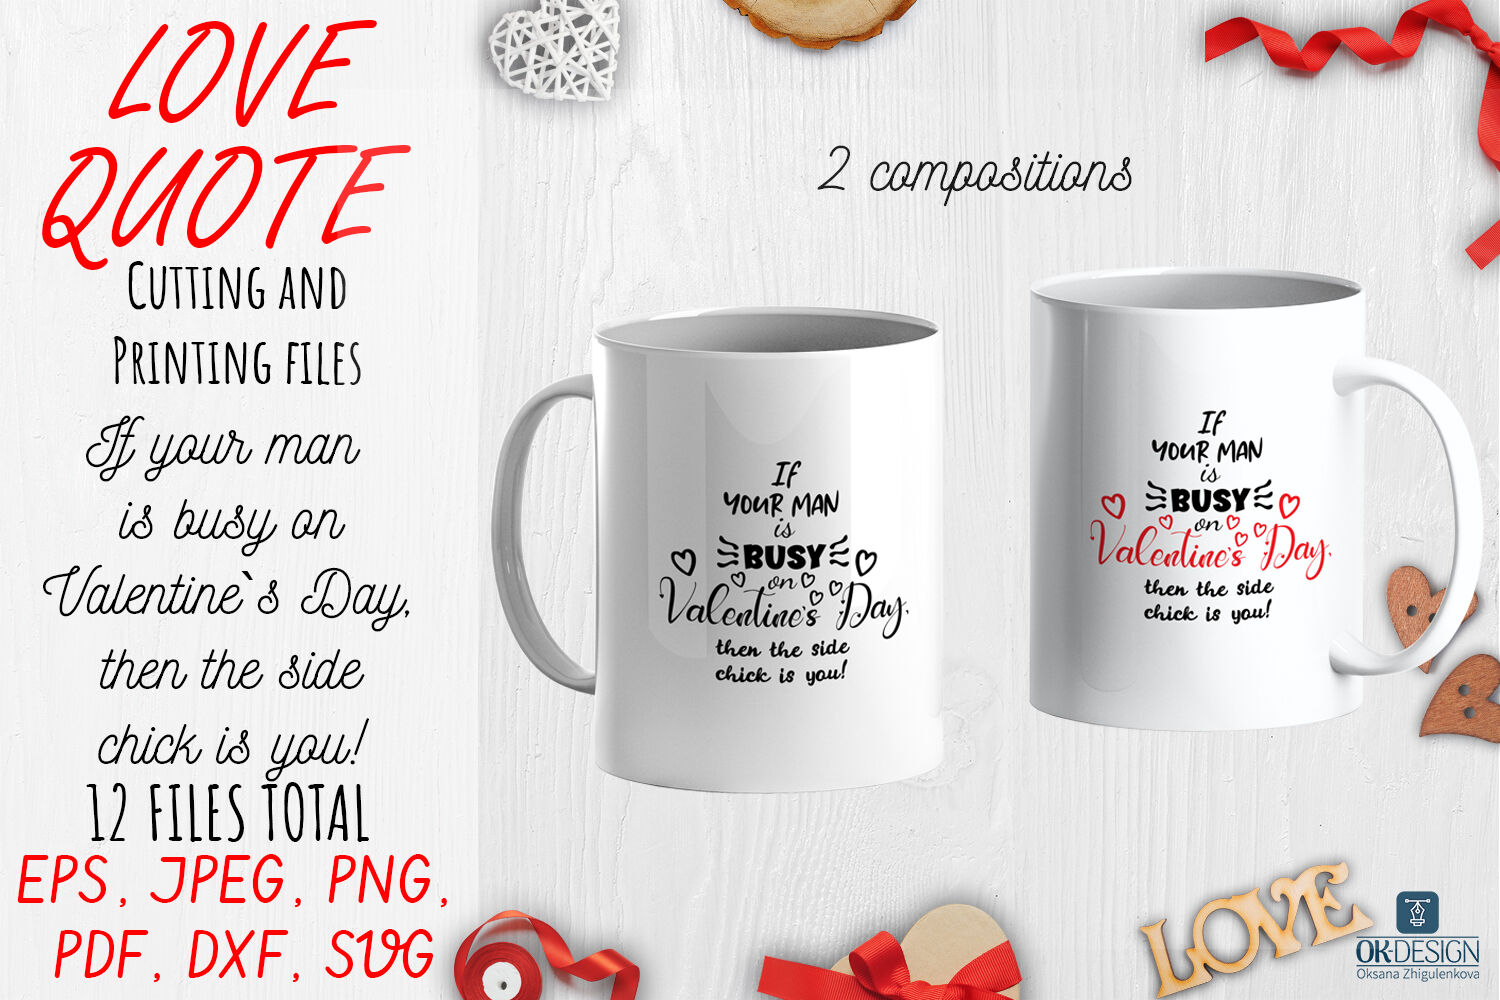 Download Love Quote Svg If Your Man Is Busy On Valentines Day Then The Side Chick Is You By Ok Design Thehungryjpeg Com